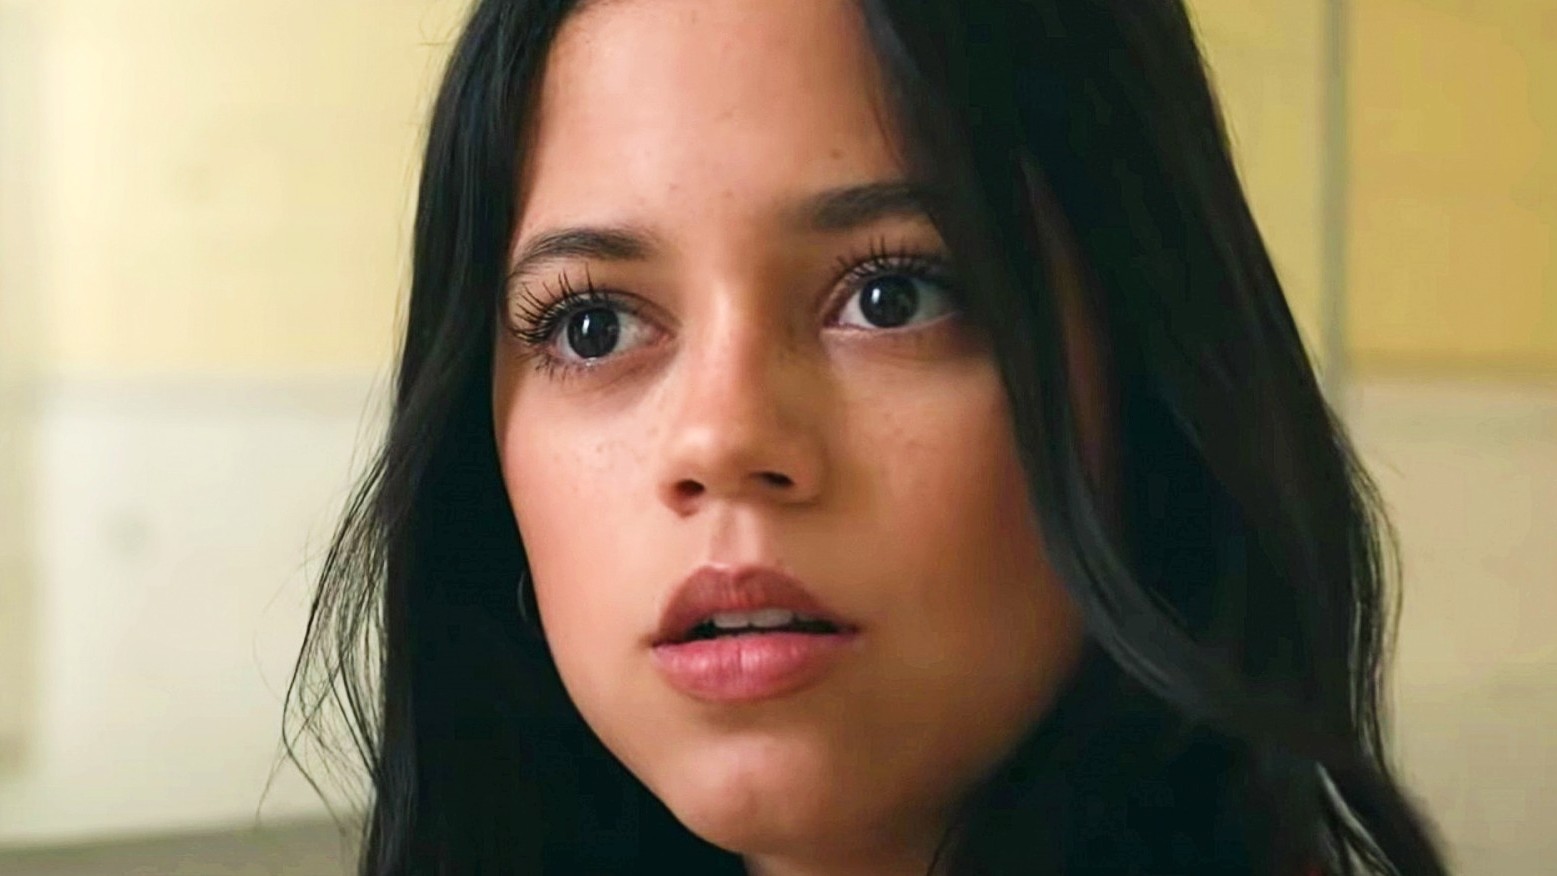 Jenna Ortega Looks Perfect As The New Rogue In XMen, See The Stunning